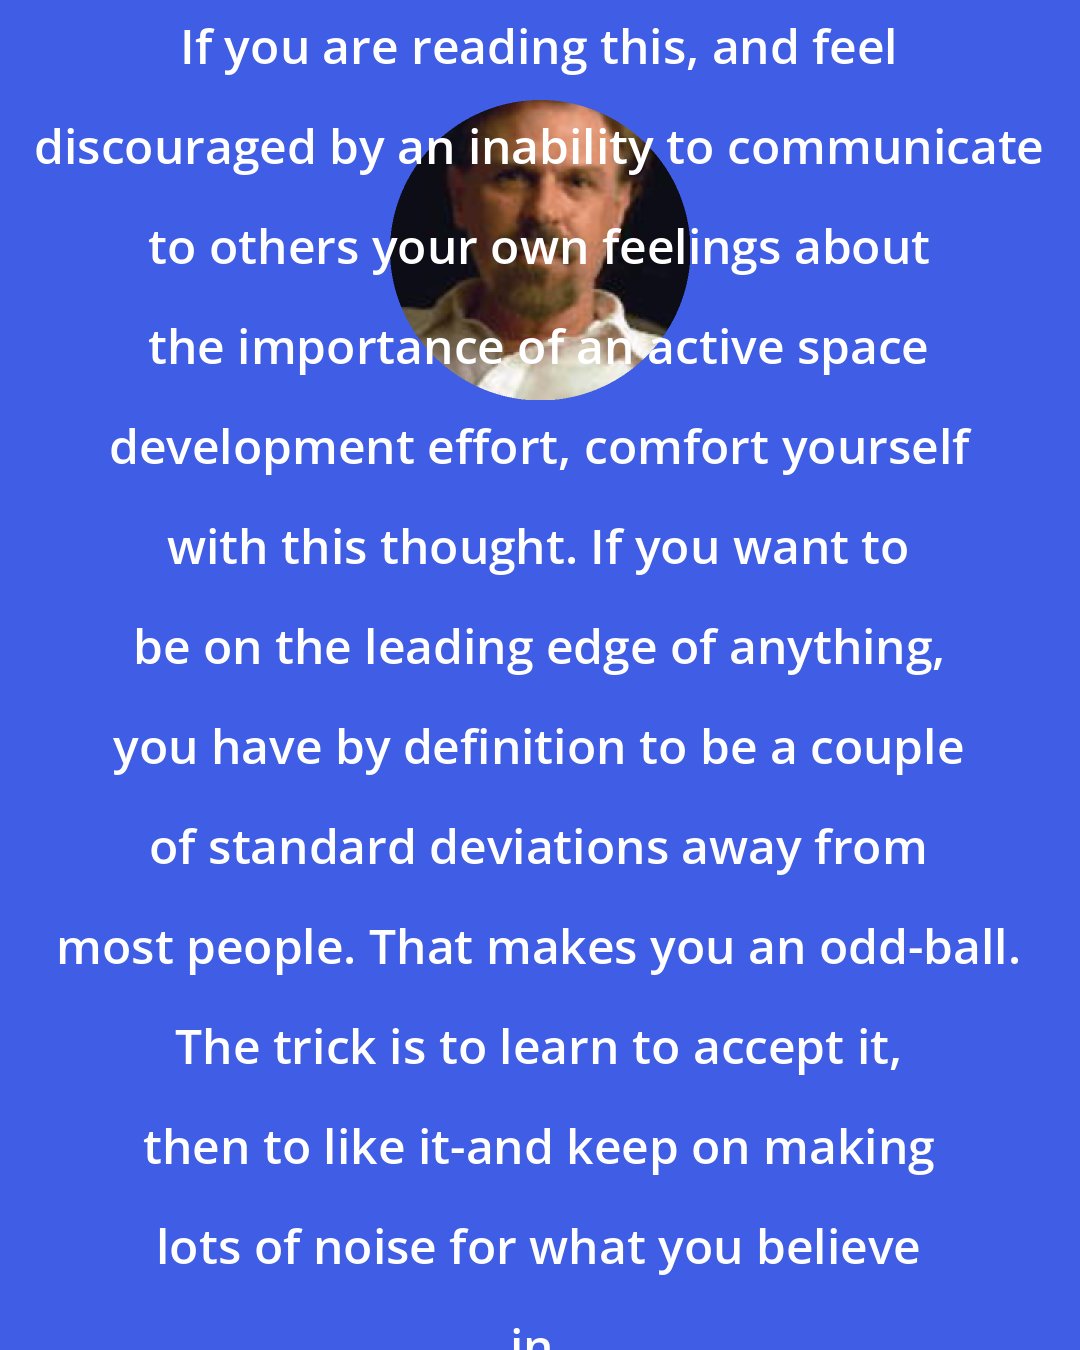 Charles Sheffield: If you are reading this, and feel discouraged by an inability to communicate to others your own feelings about the importance of an active space development effort, comfort yourself with this thought. If you want to be on the leading edge of anything, you have by definition to be a couple of standard deviations away from most people. That makes you an odd-ball. The trick is to learn to accept it, then to like it-and keep on making lots of noise for what you believe in.